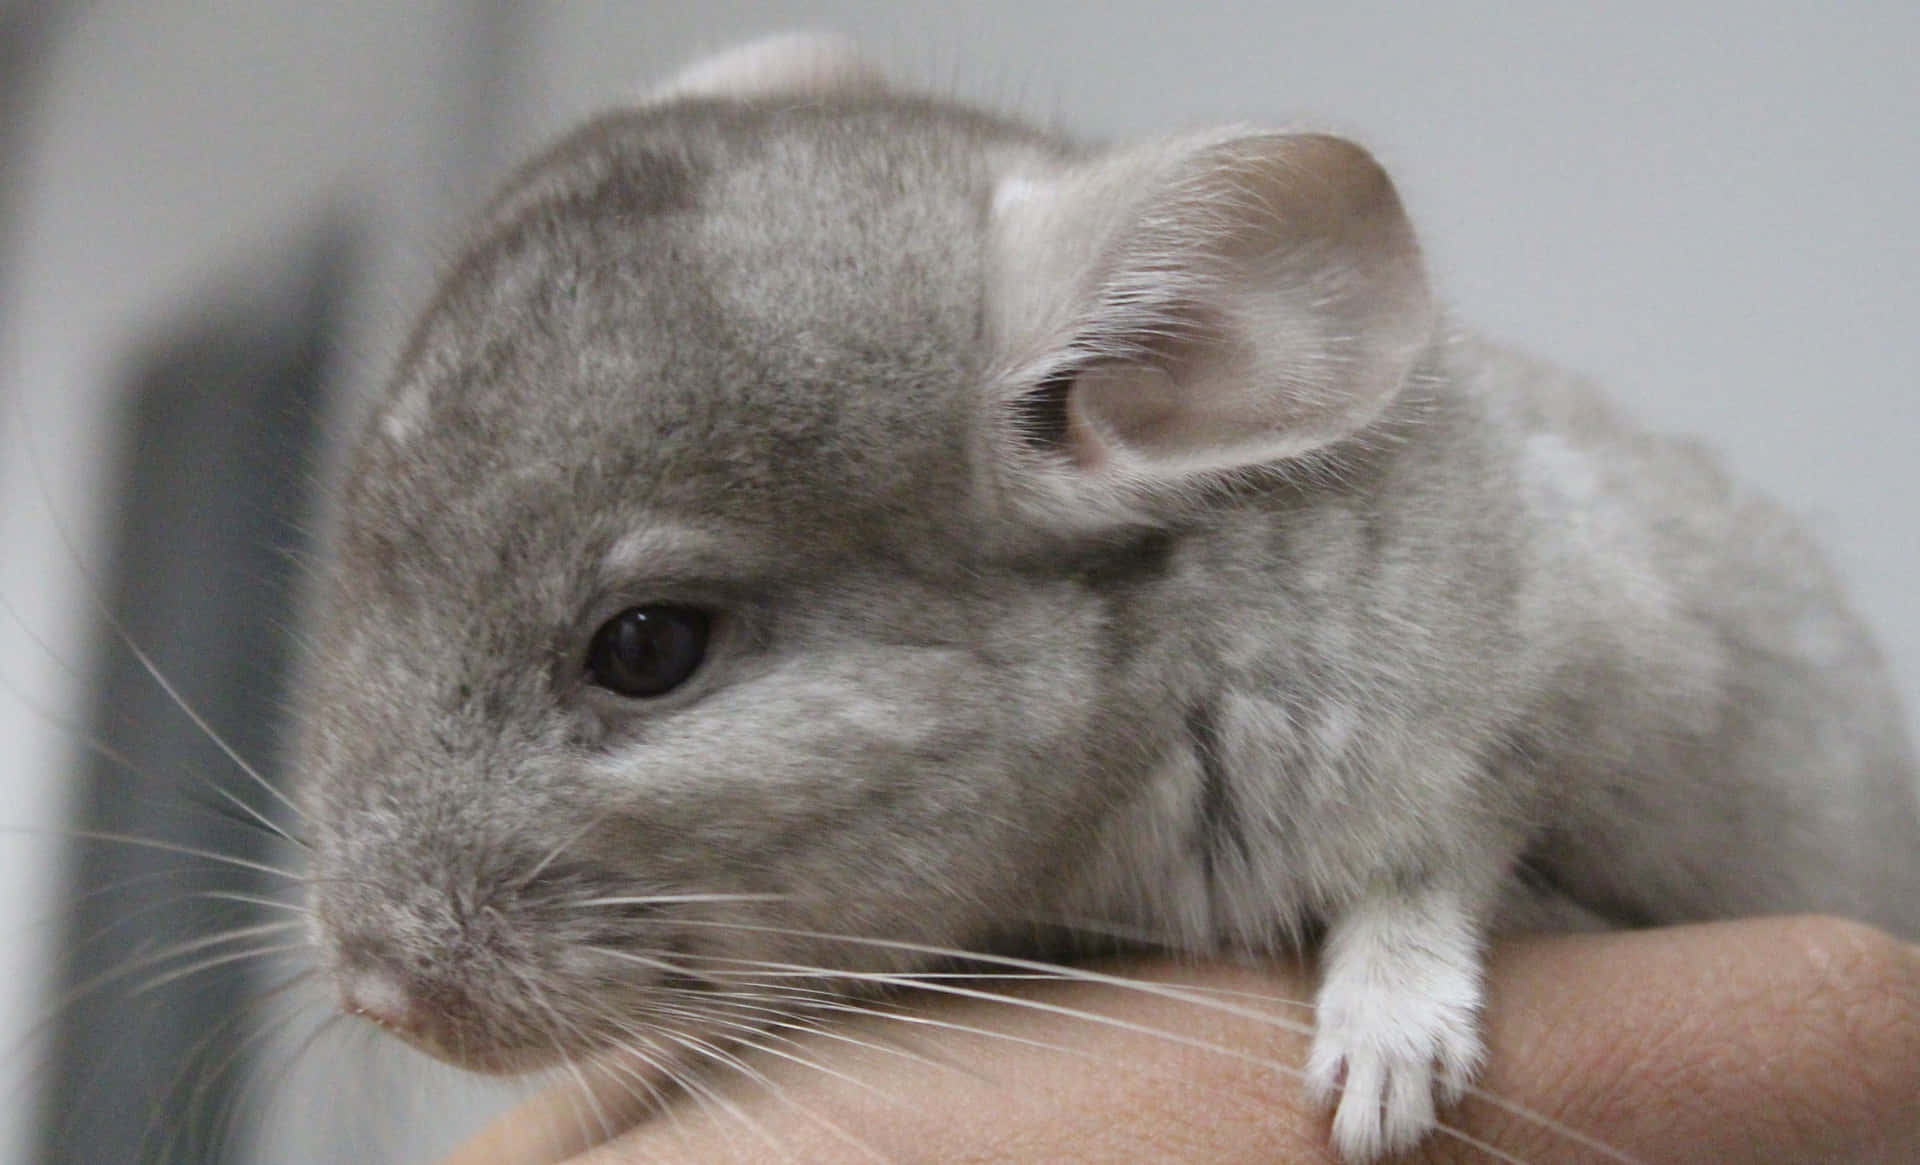 A cute chinchilla looks up at you with its big eyes